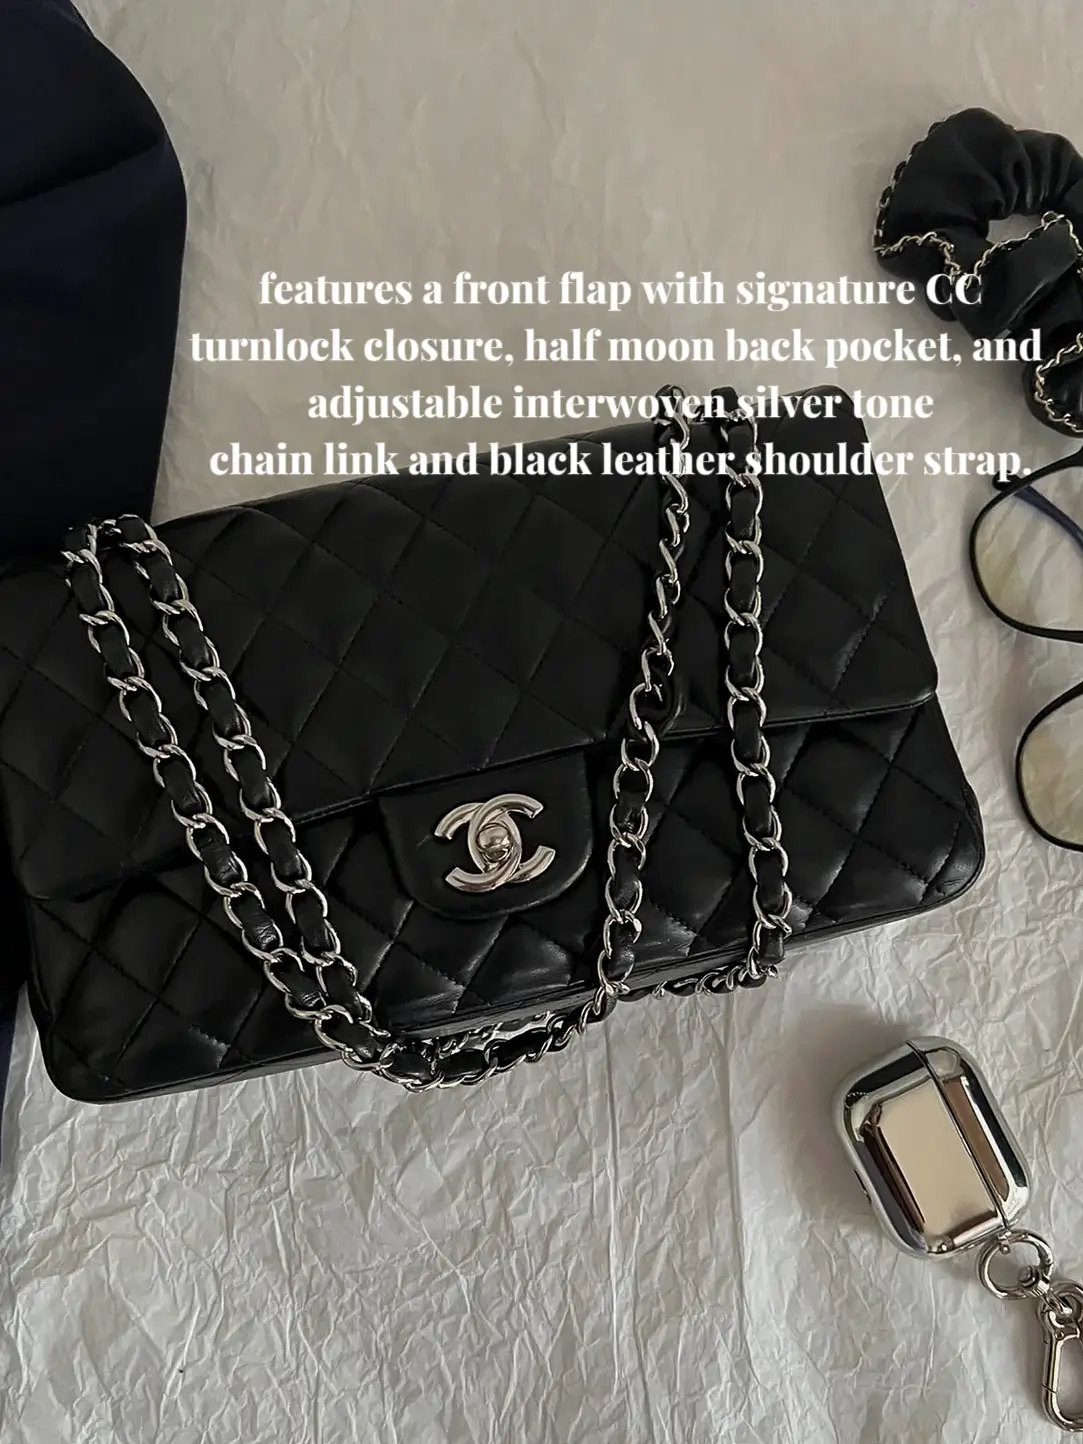 CHANEL Classic Flap Handbag, Gallery posted by Amelix